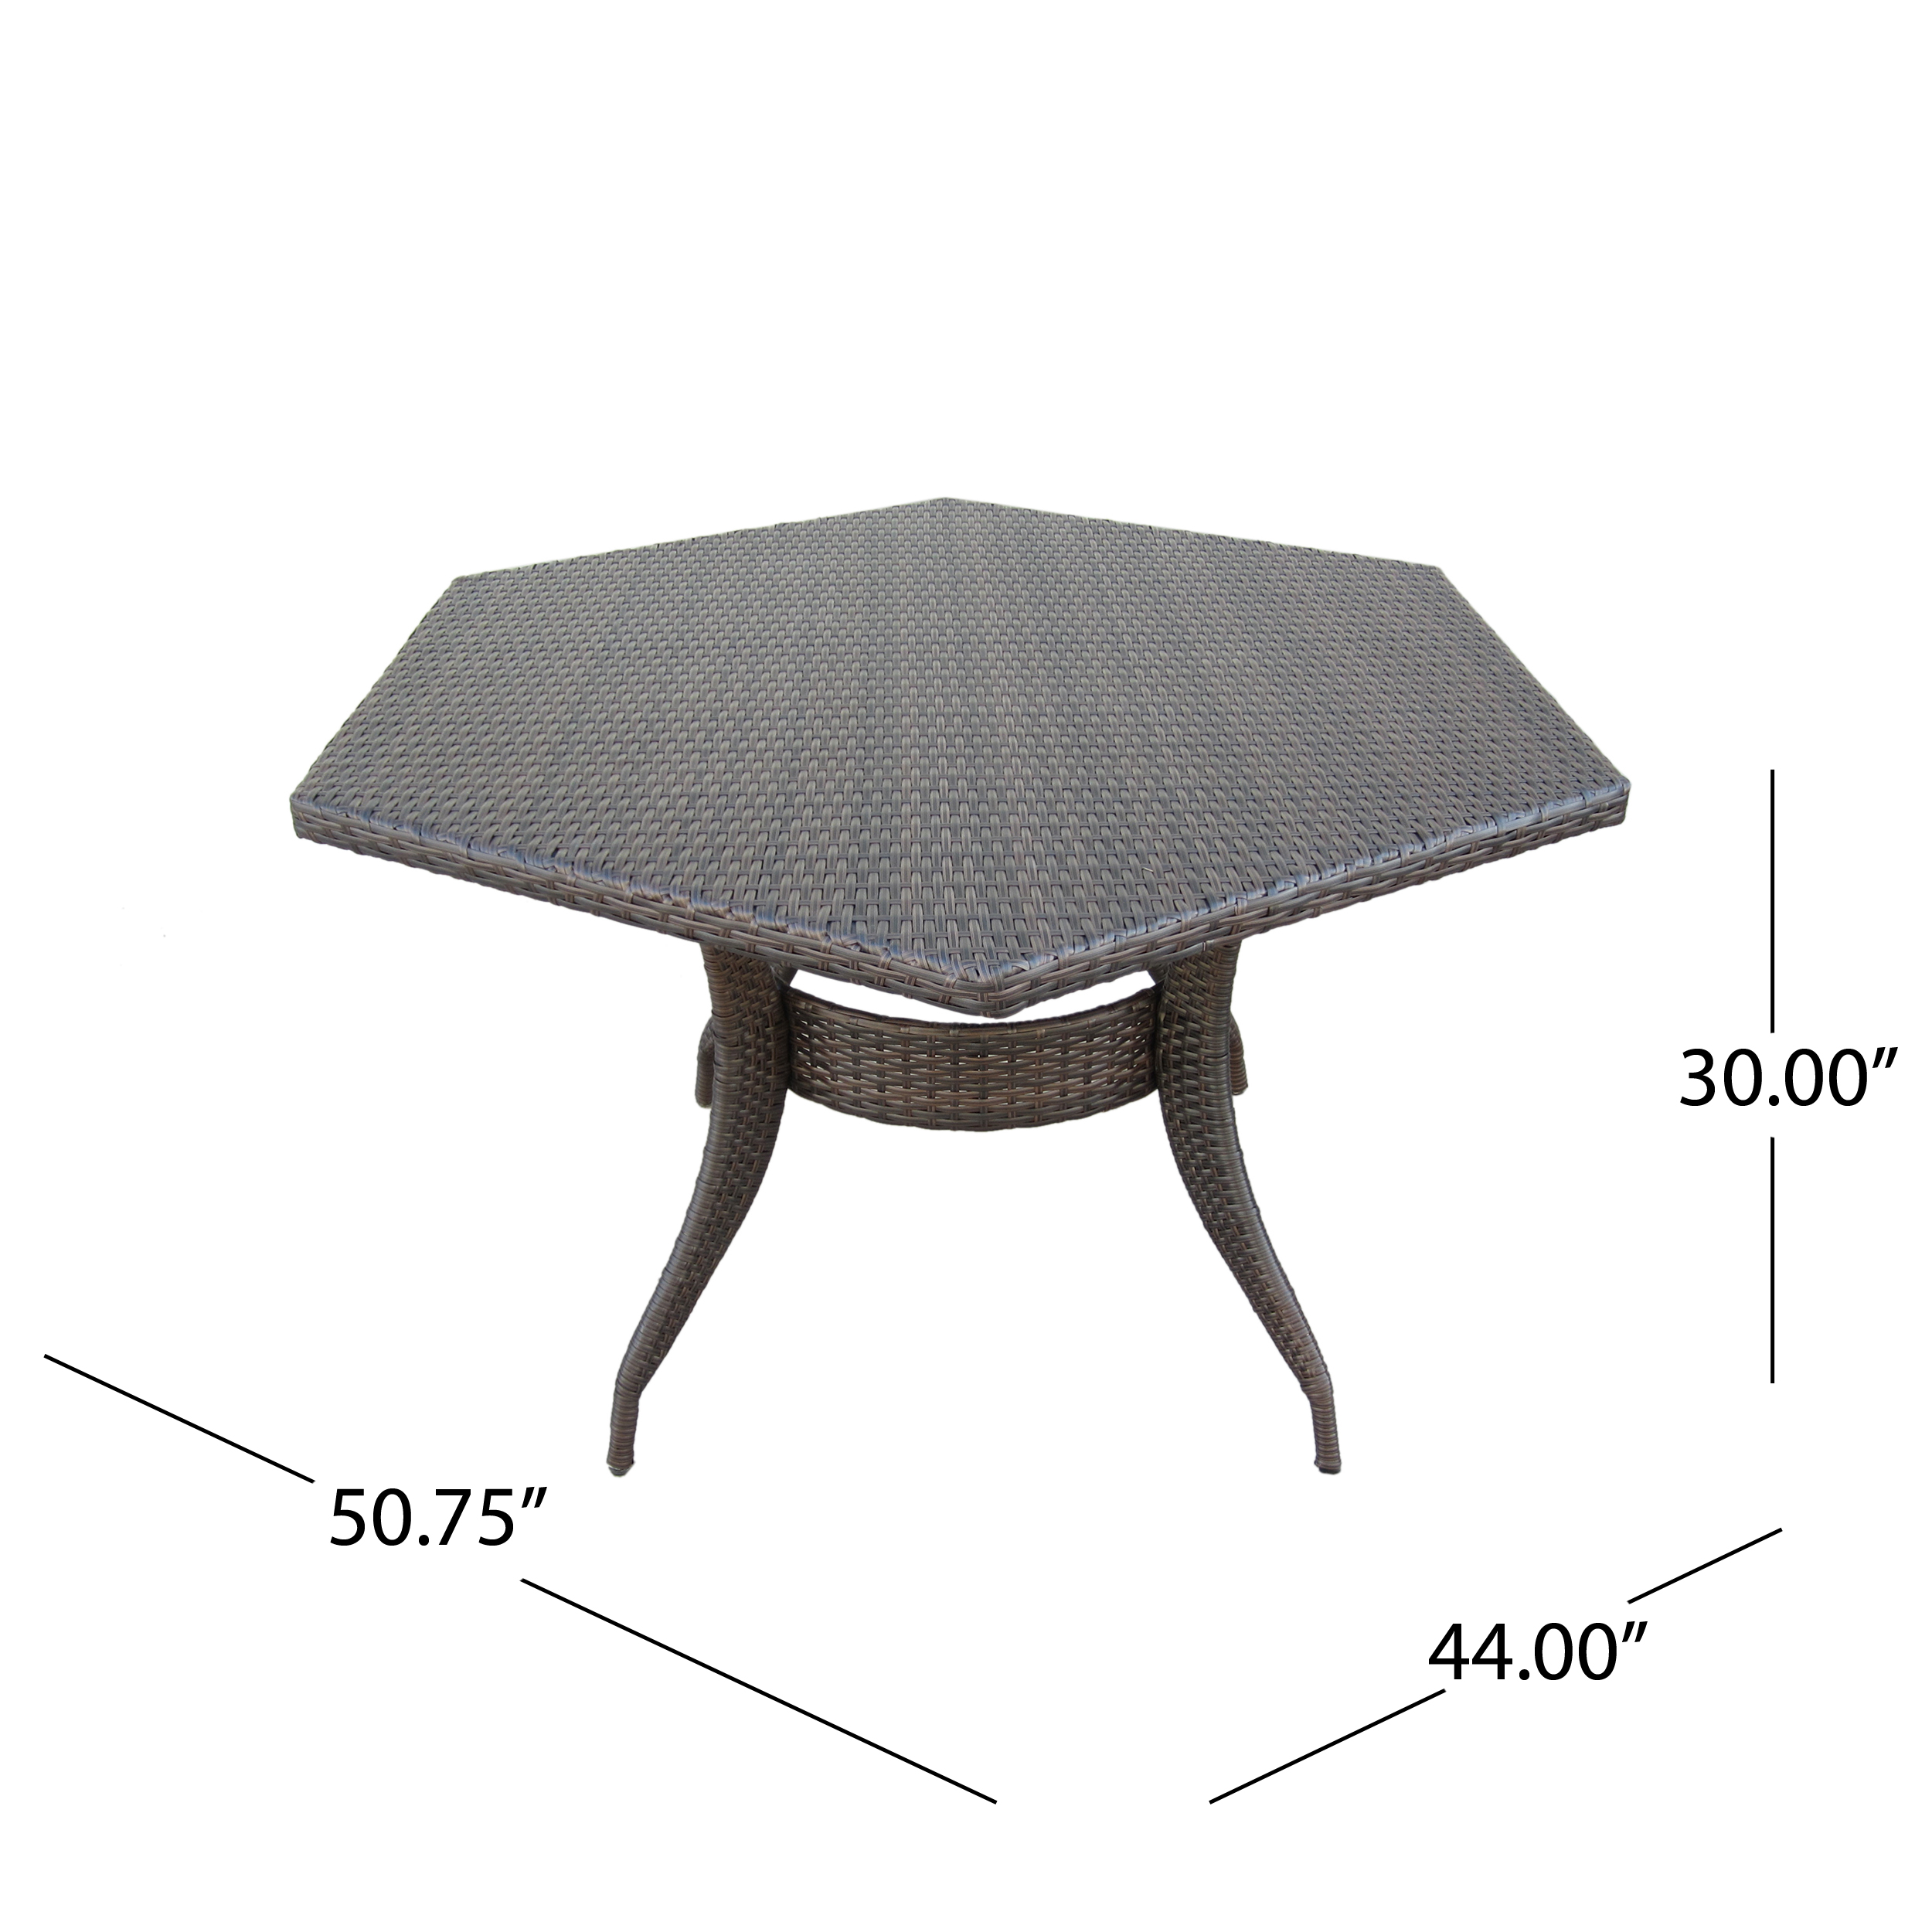 Outdoor 53-Inch Wicker Hexagon Dining Table, Multi Brown - image 6 of 9